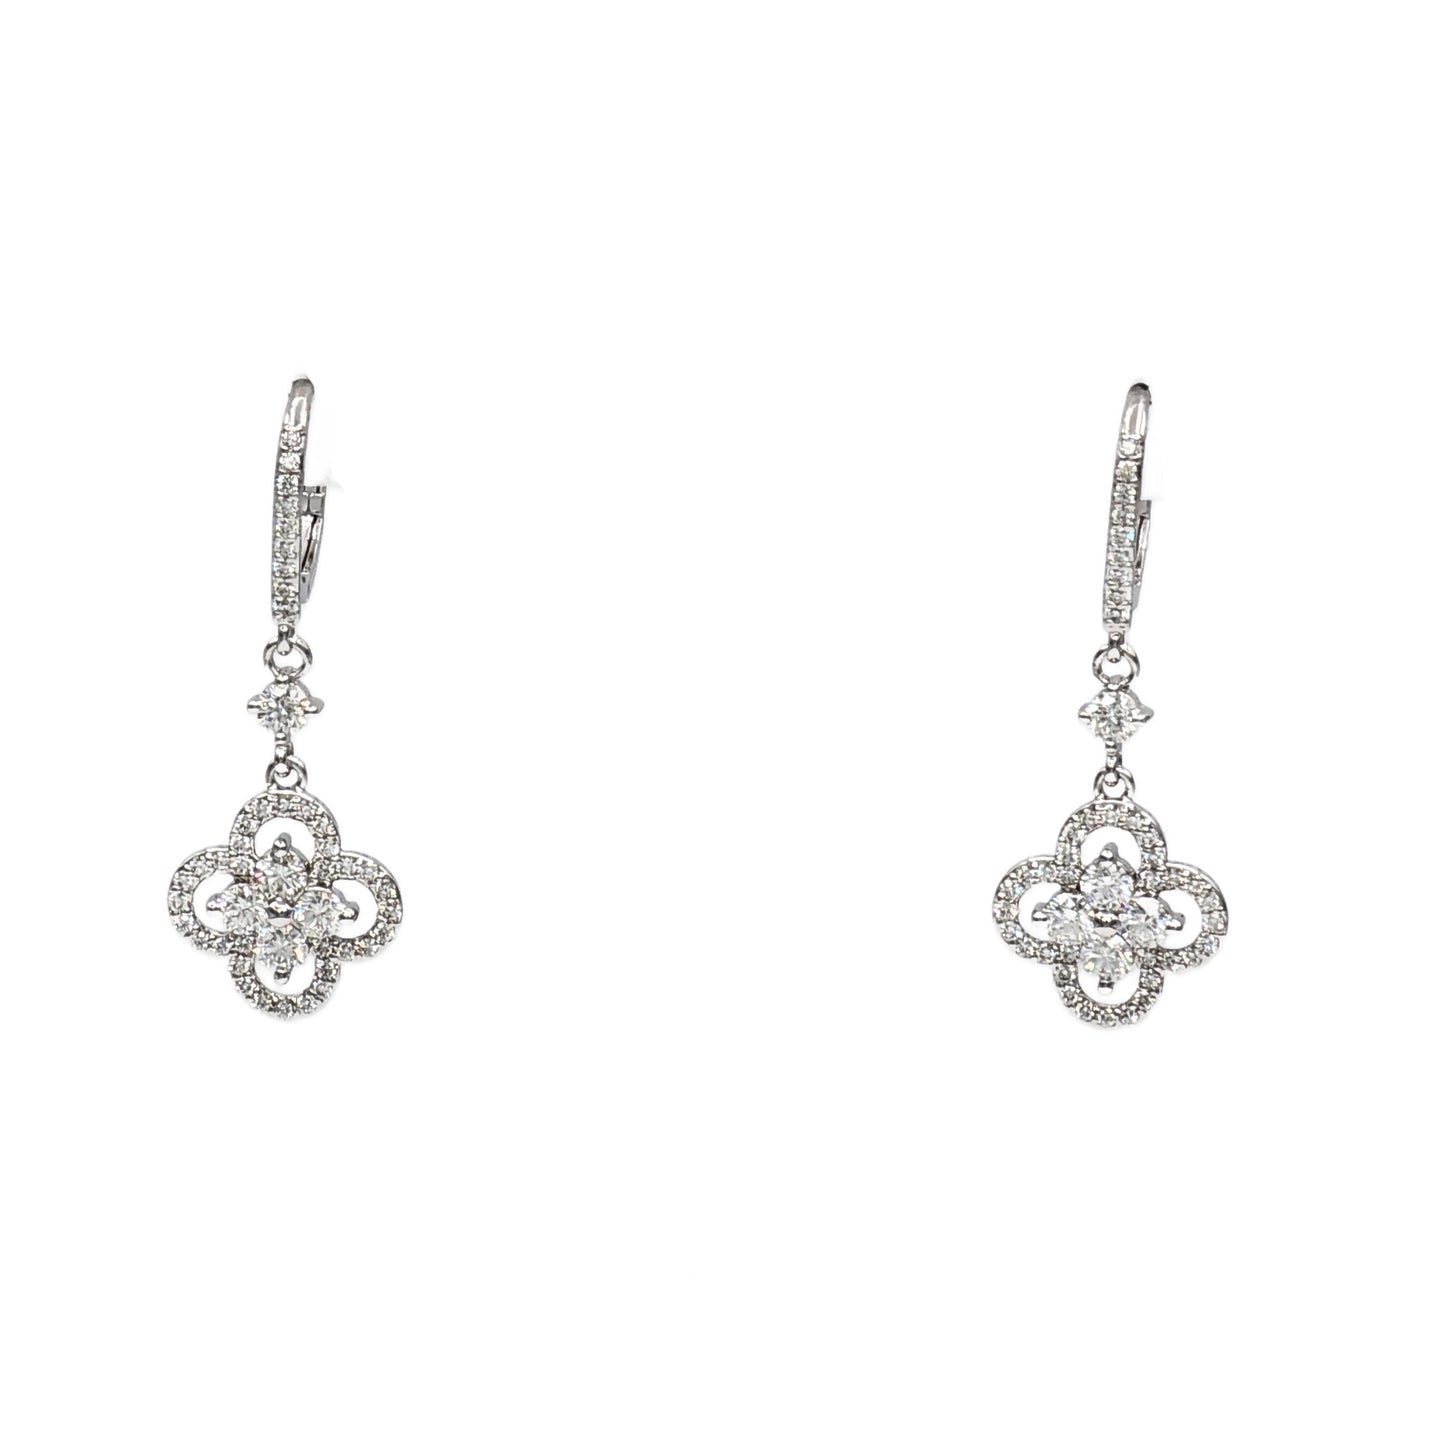 1.86 Carat Total Weight Round Diamond Dangle Earrings in 18K White Gold